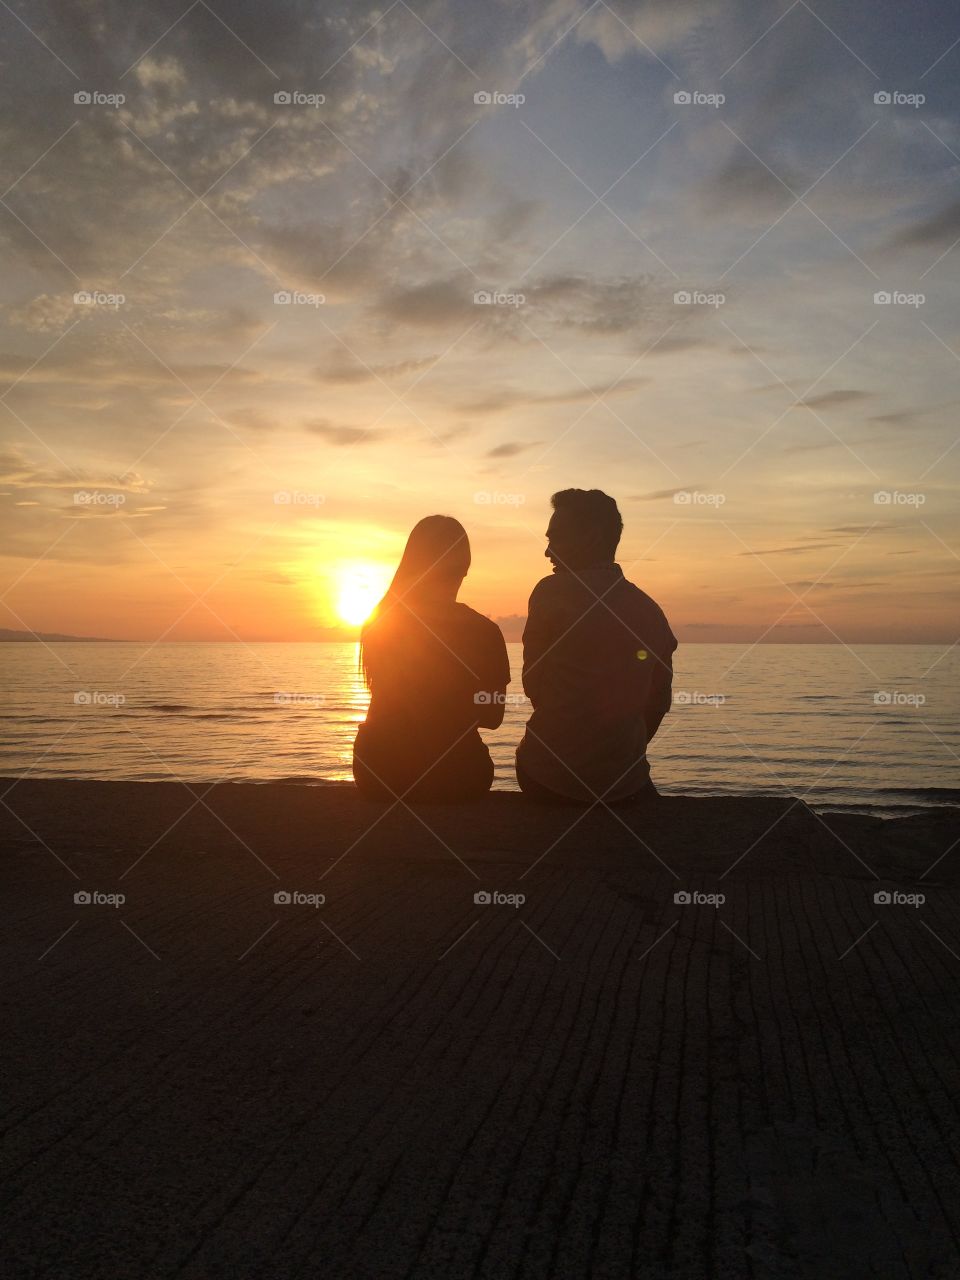 #LoversInTheSunset

Golden sunsets in the east..
The land of Ophir (Philippines)
The Land of Promise!